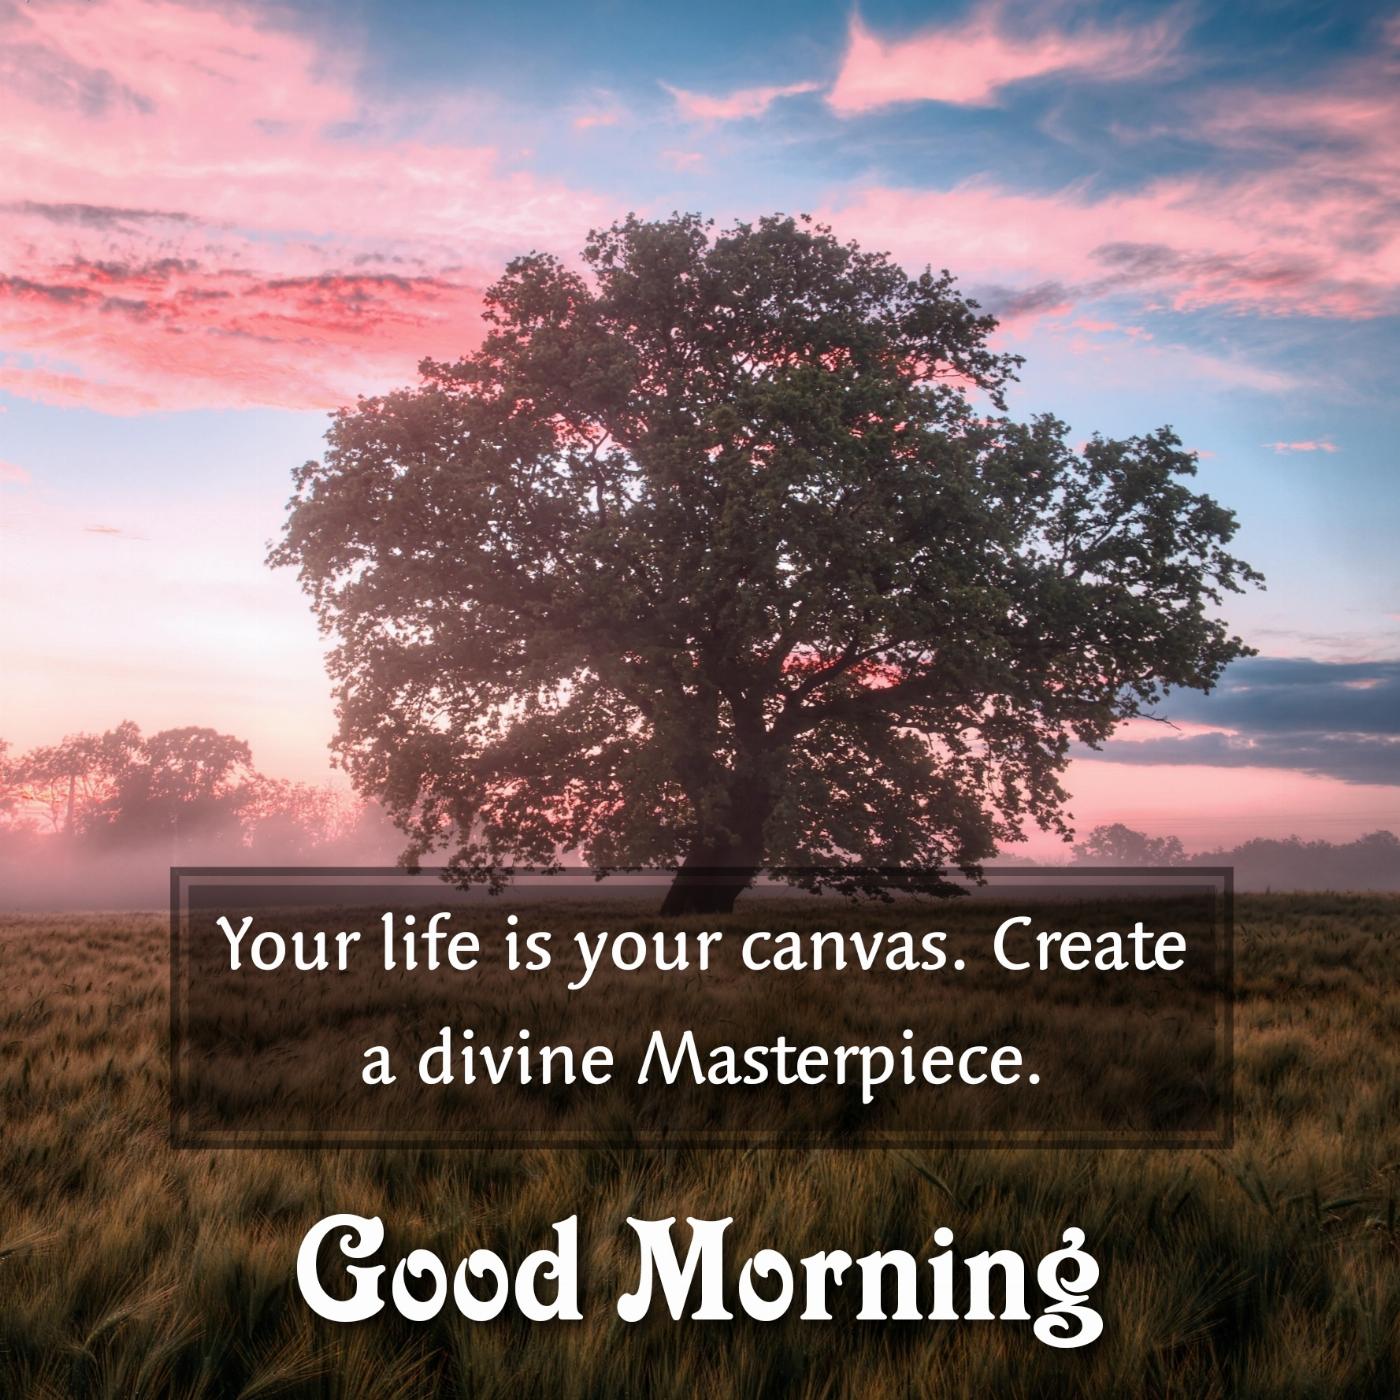 Your life is your canvas Create a divine Masterpiece